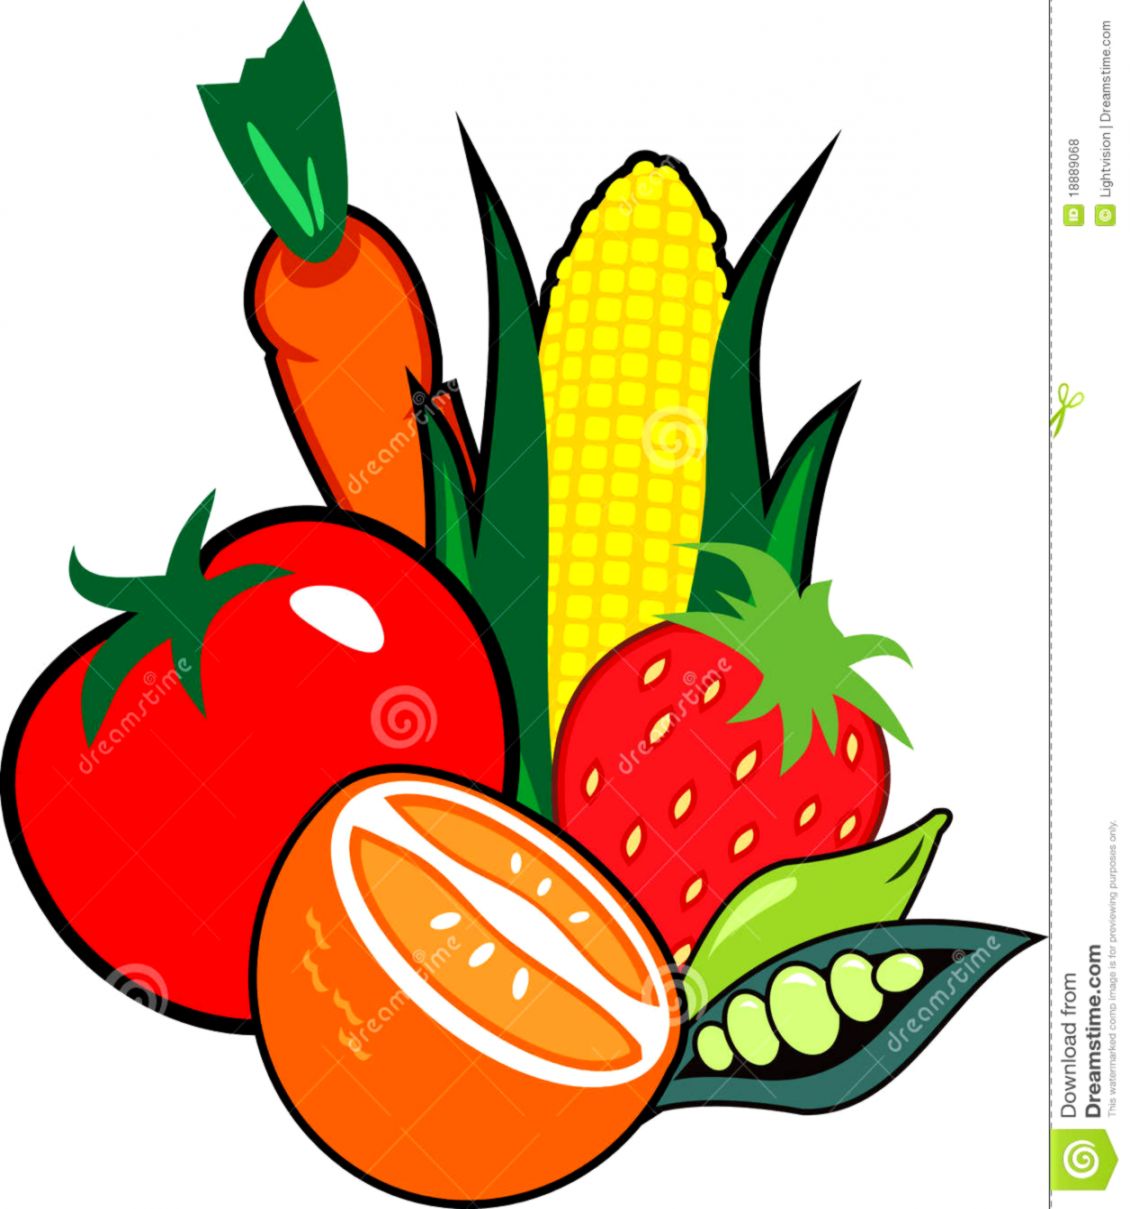 Fruit And Vegetable Clip Art.